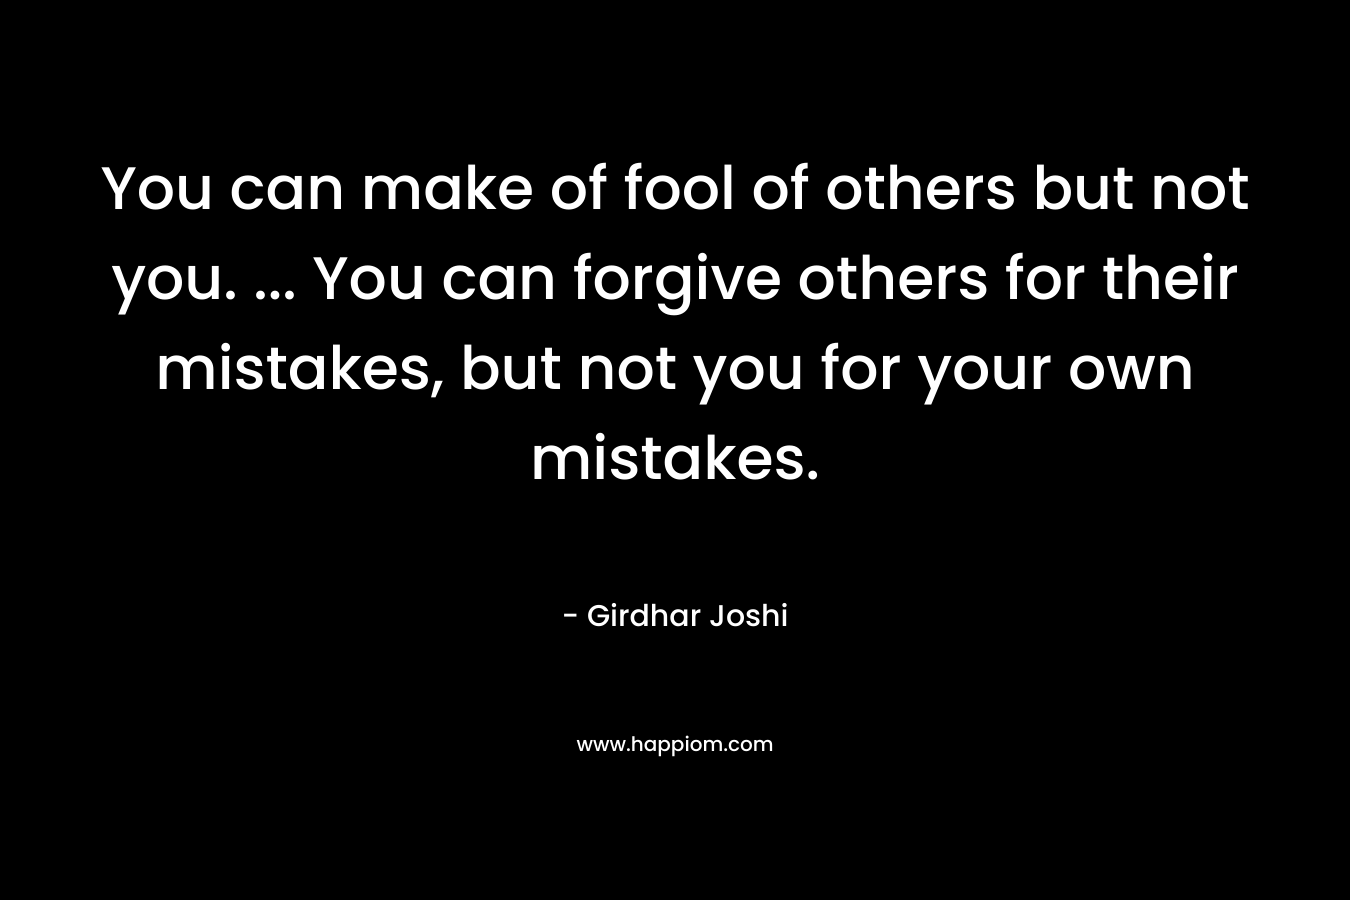 You can make of fool of others but not you. ... You can forgive others for their mistakes, but not you for your own mistakes.